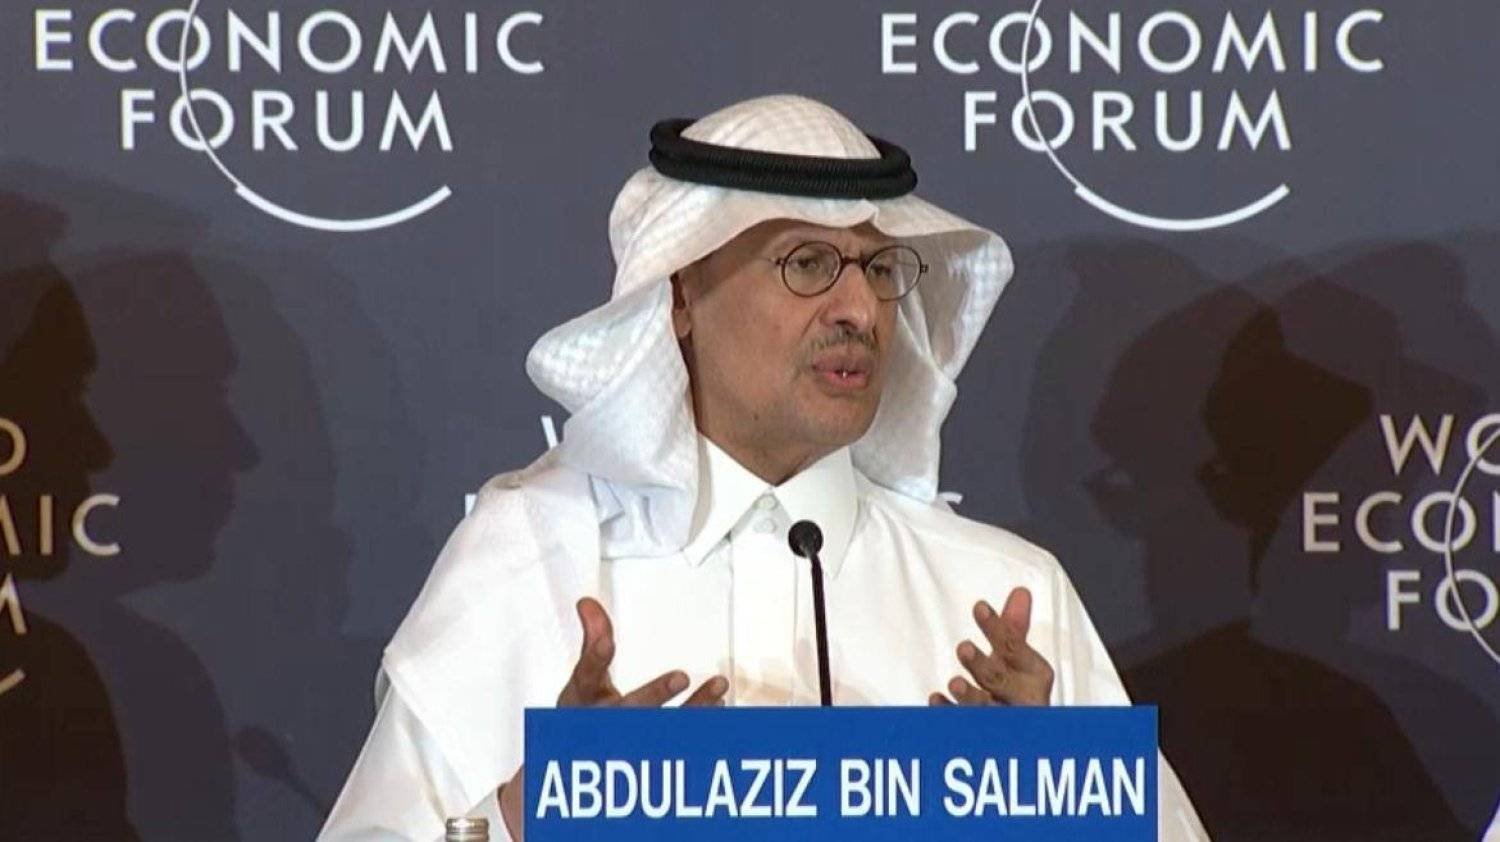 The Saudi Minister of Energy speaking to the audience during the special meeting of the World Economic Forum in Riyadh (Asharq Al-Awsat)